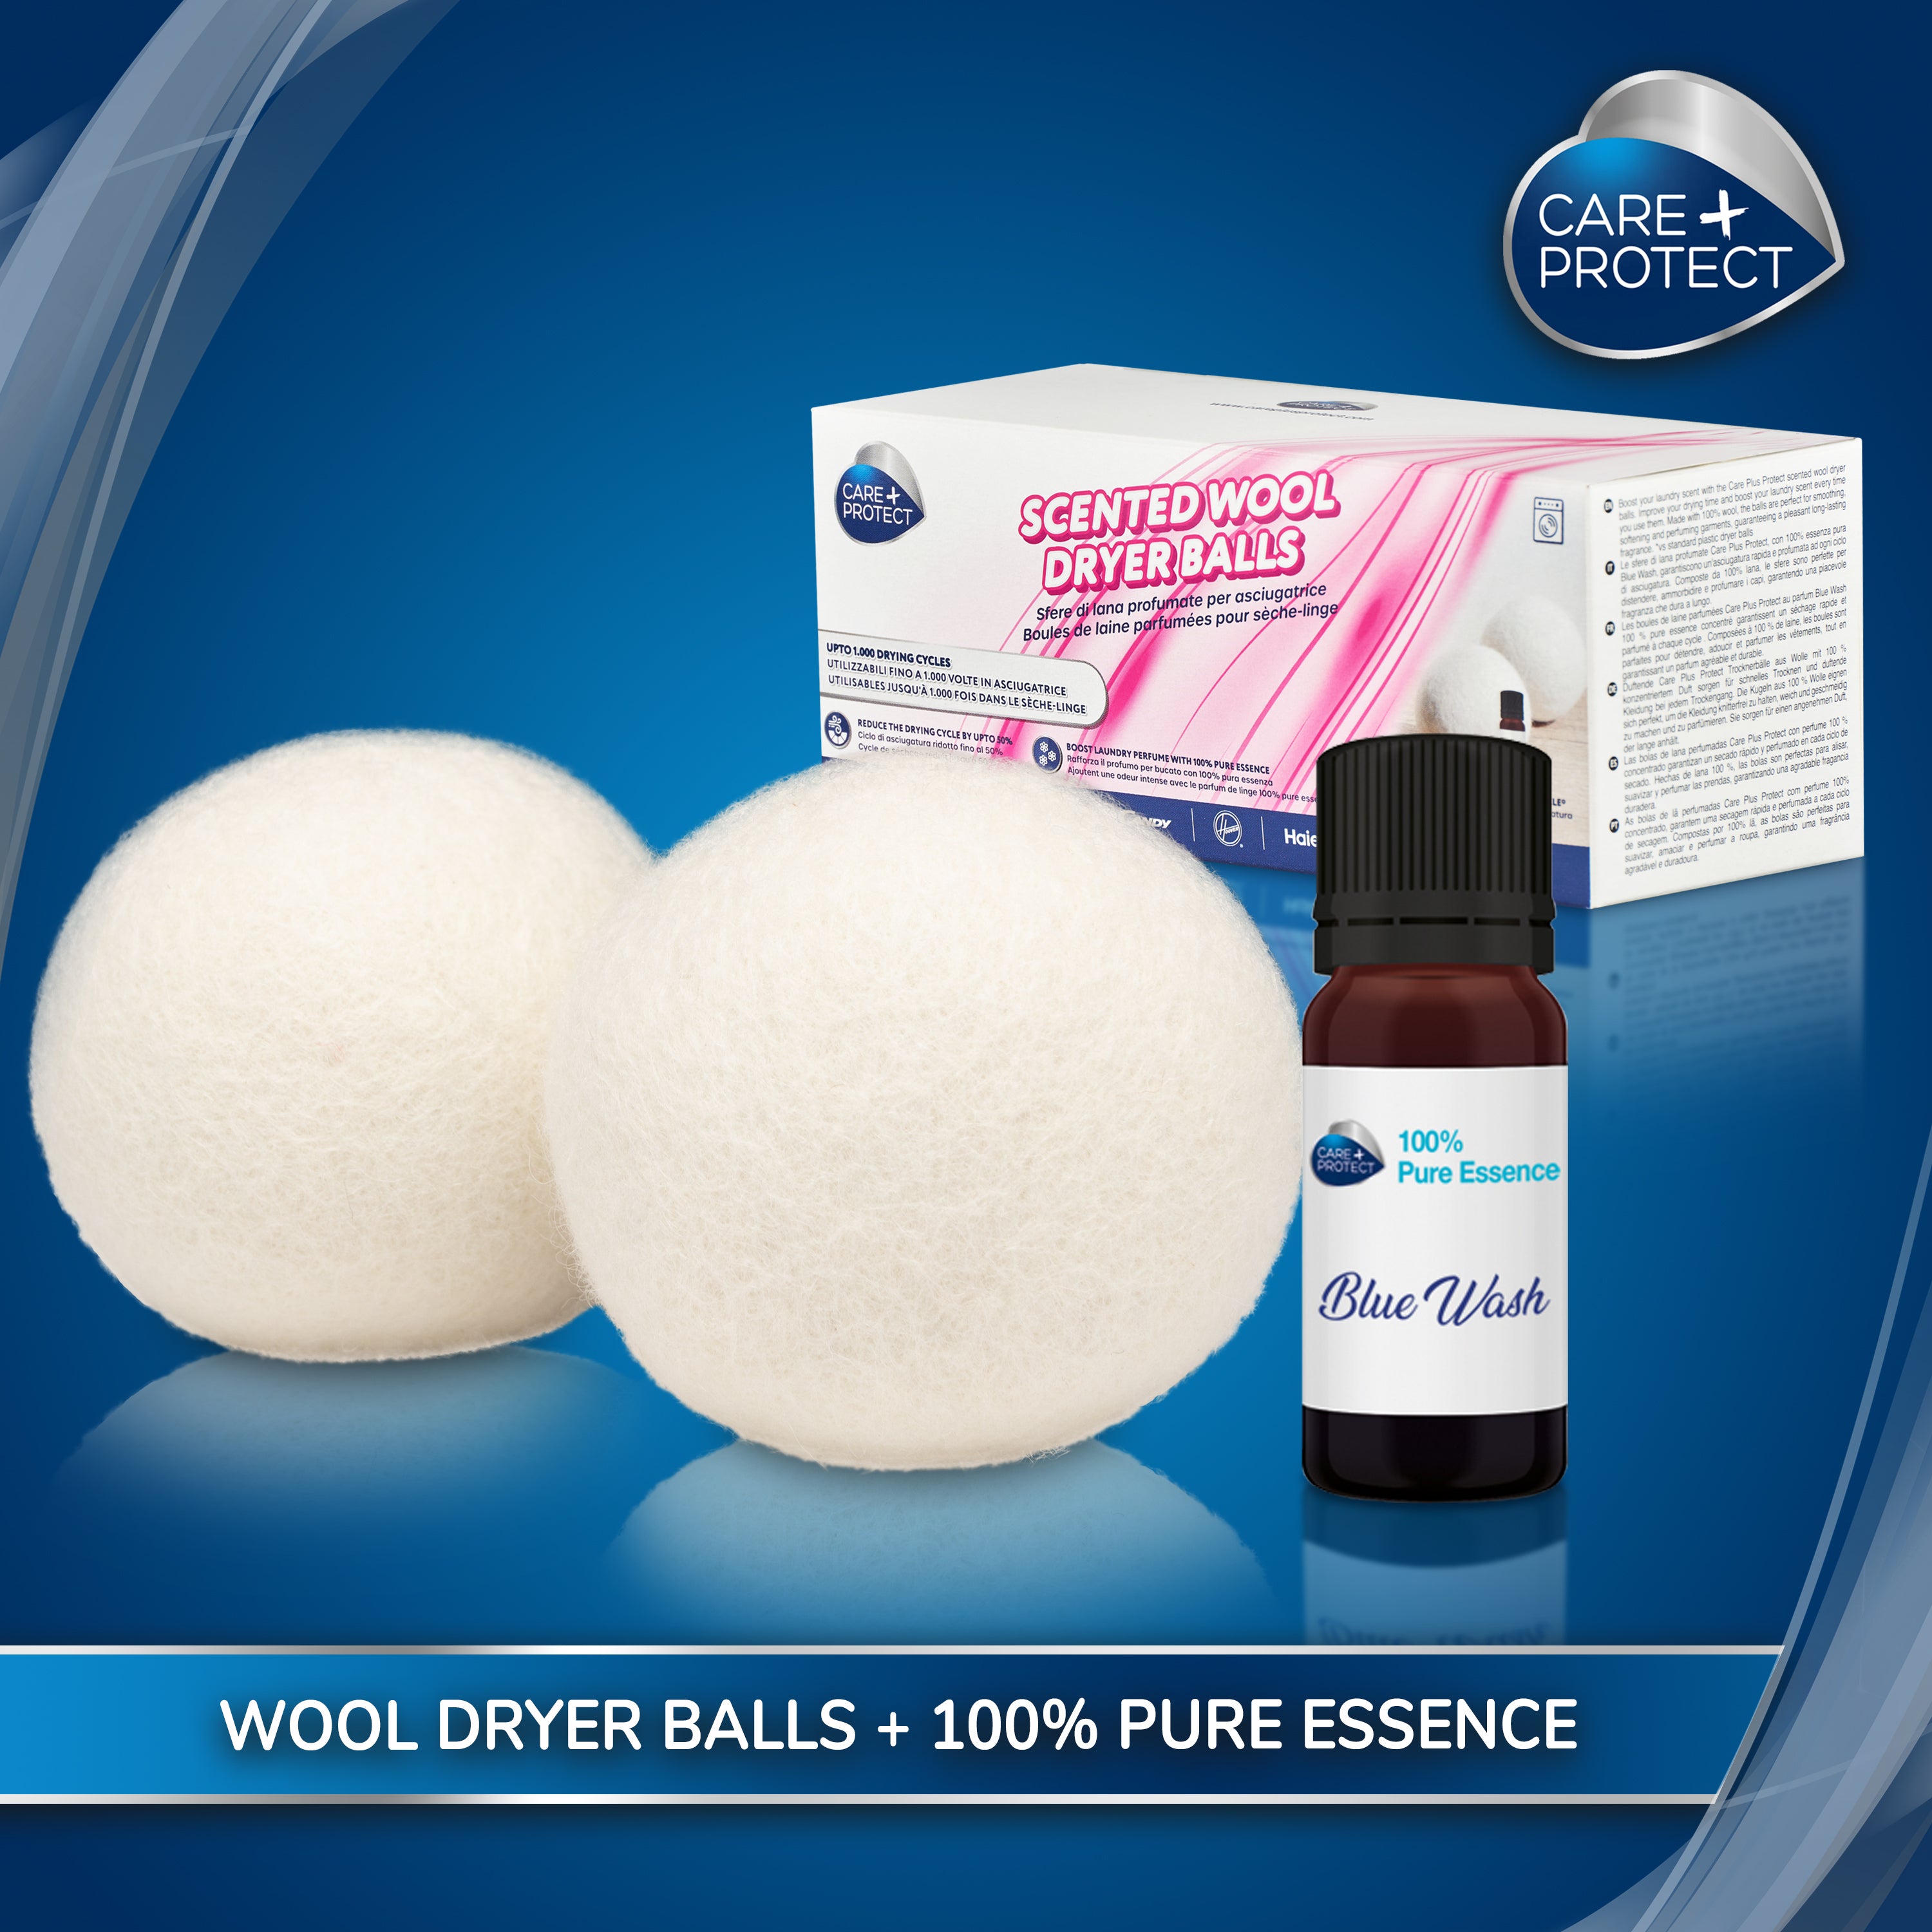 CARE + PROTECT Wool Dryer Balls With 100% Perfumed Essence, Half Your Drying Time, Save Energy, 1000 Cycles, Pack of 2 Balls + 10ml Essence